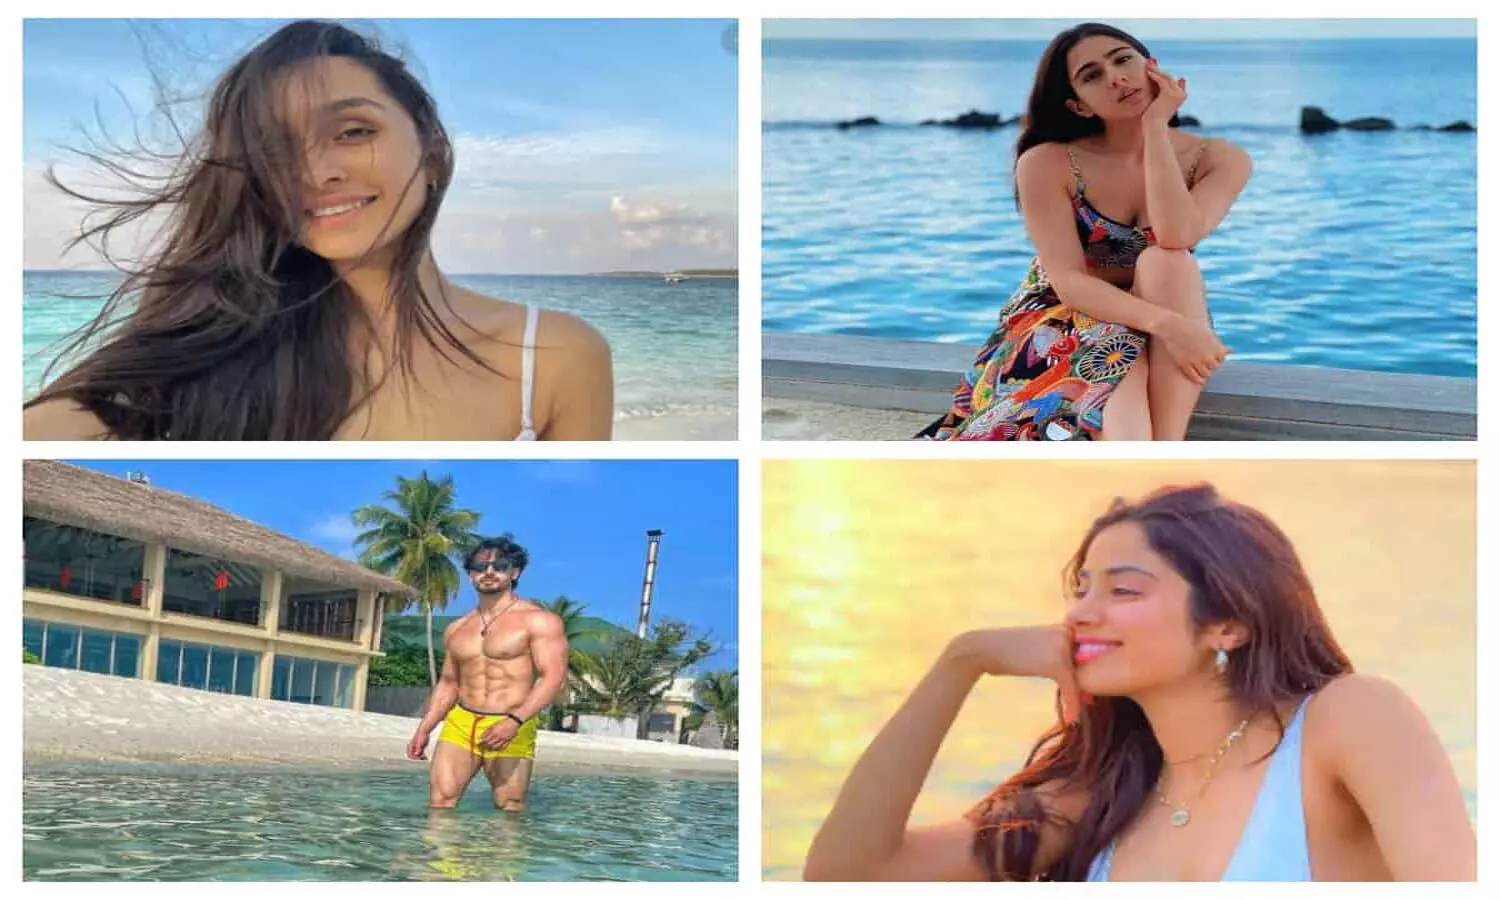 Social Media on a buzz with memes trolling Bollywood stars after Maldives bans flights from India